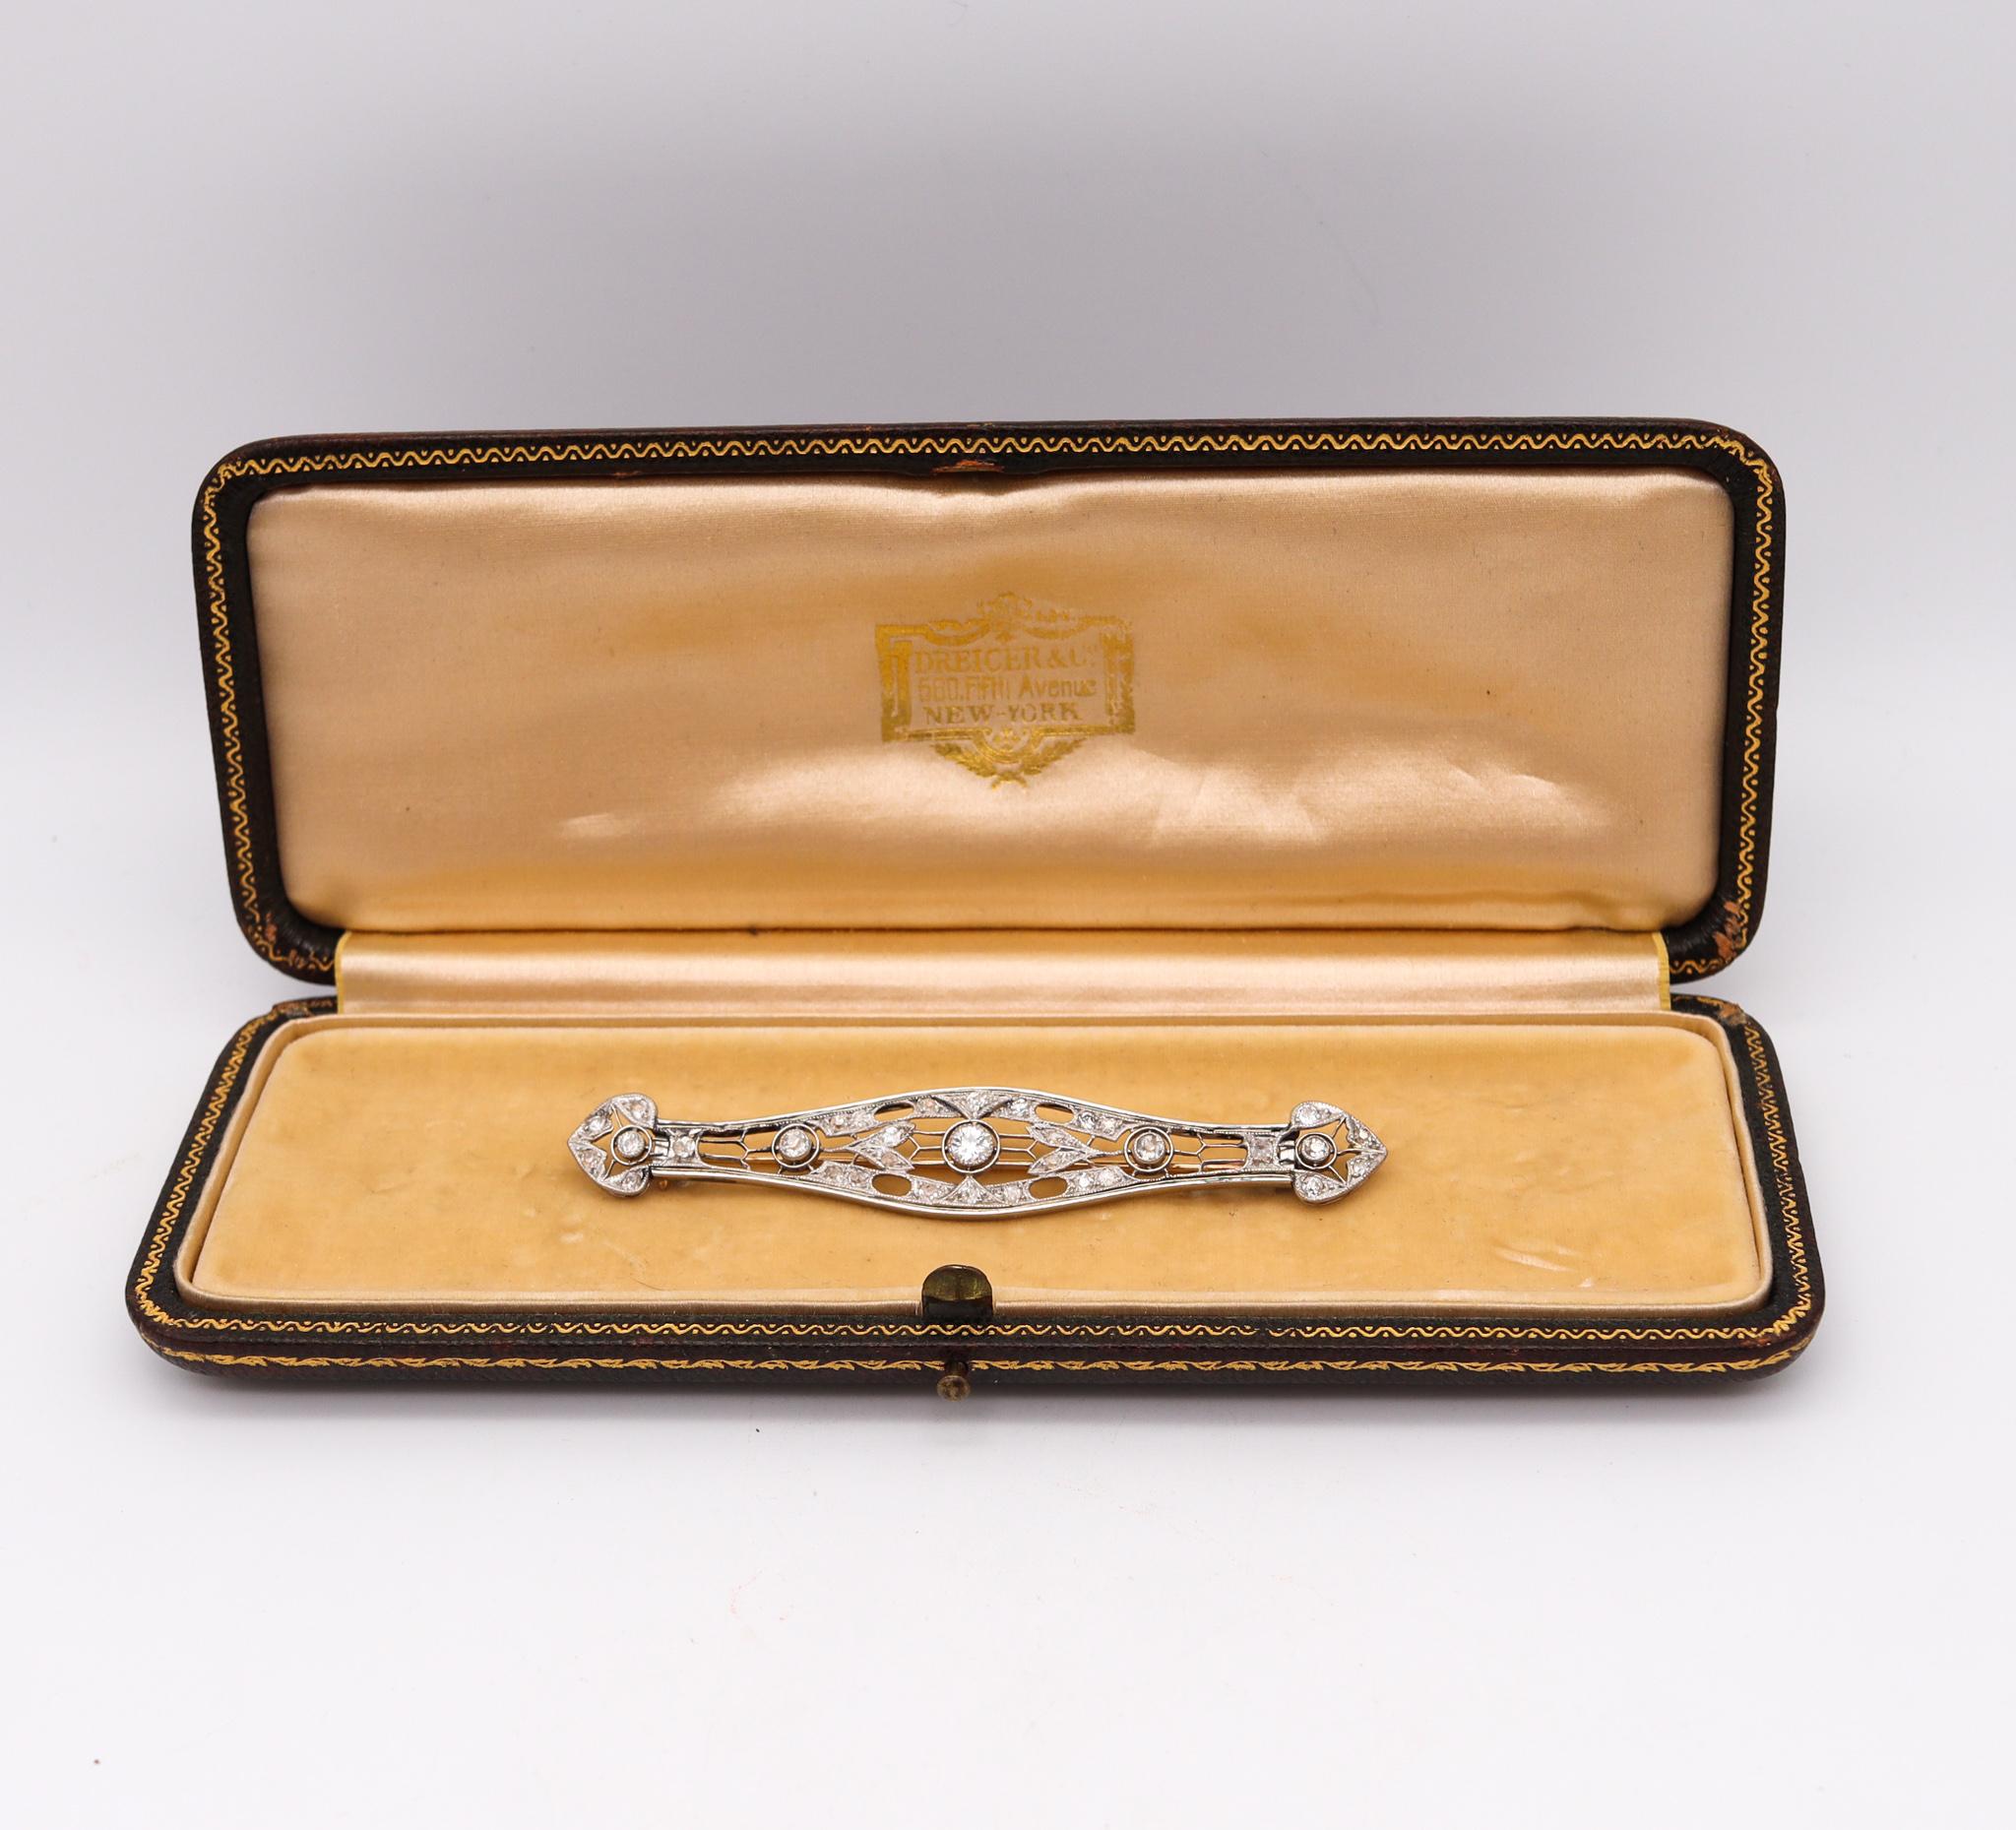 An art deco brooch with diamonds.

Beautiful classic brooch, created during the American art deco period, back in the 1920 and 1930. This elongated geometric brooch has been crafted in .900/.999 platinum with 18 karats yellow gold accents in the